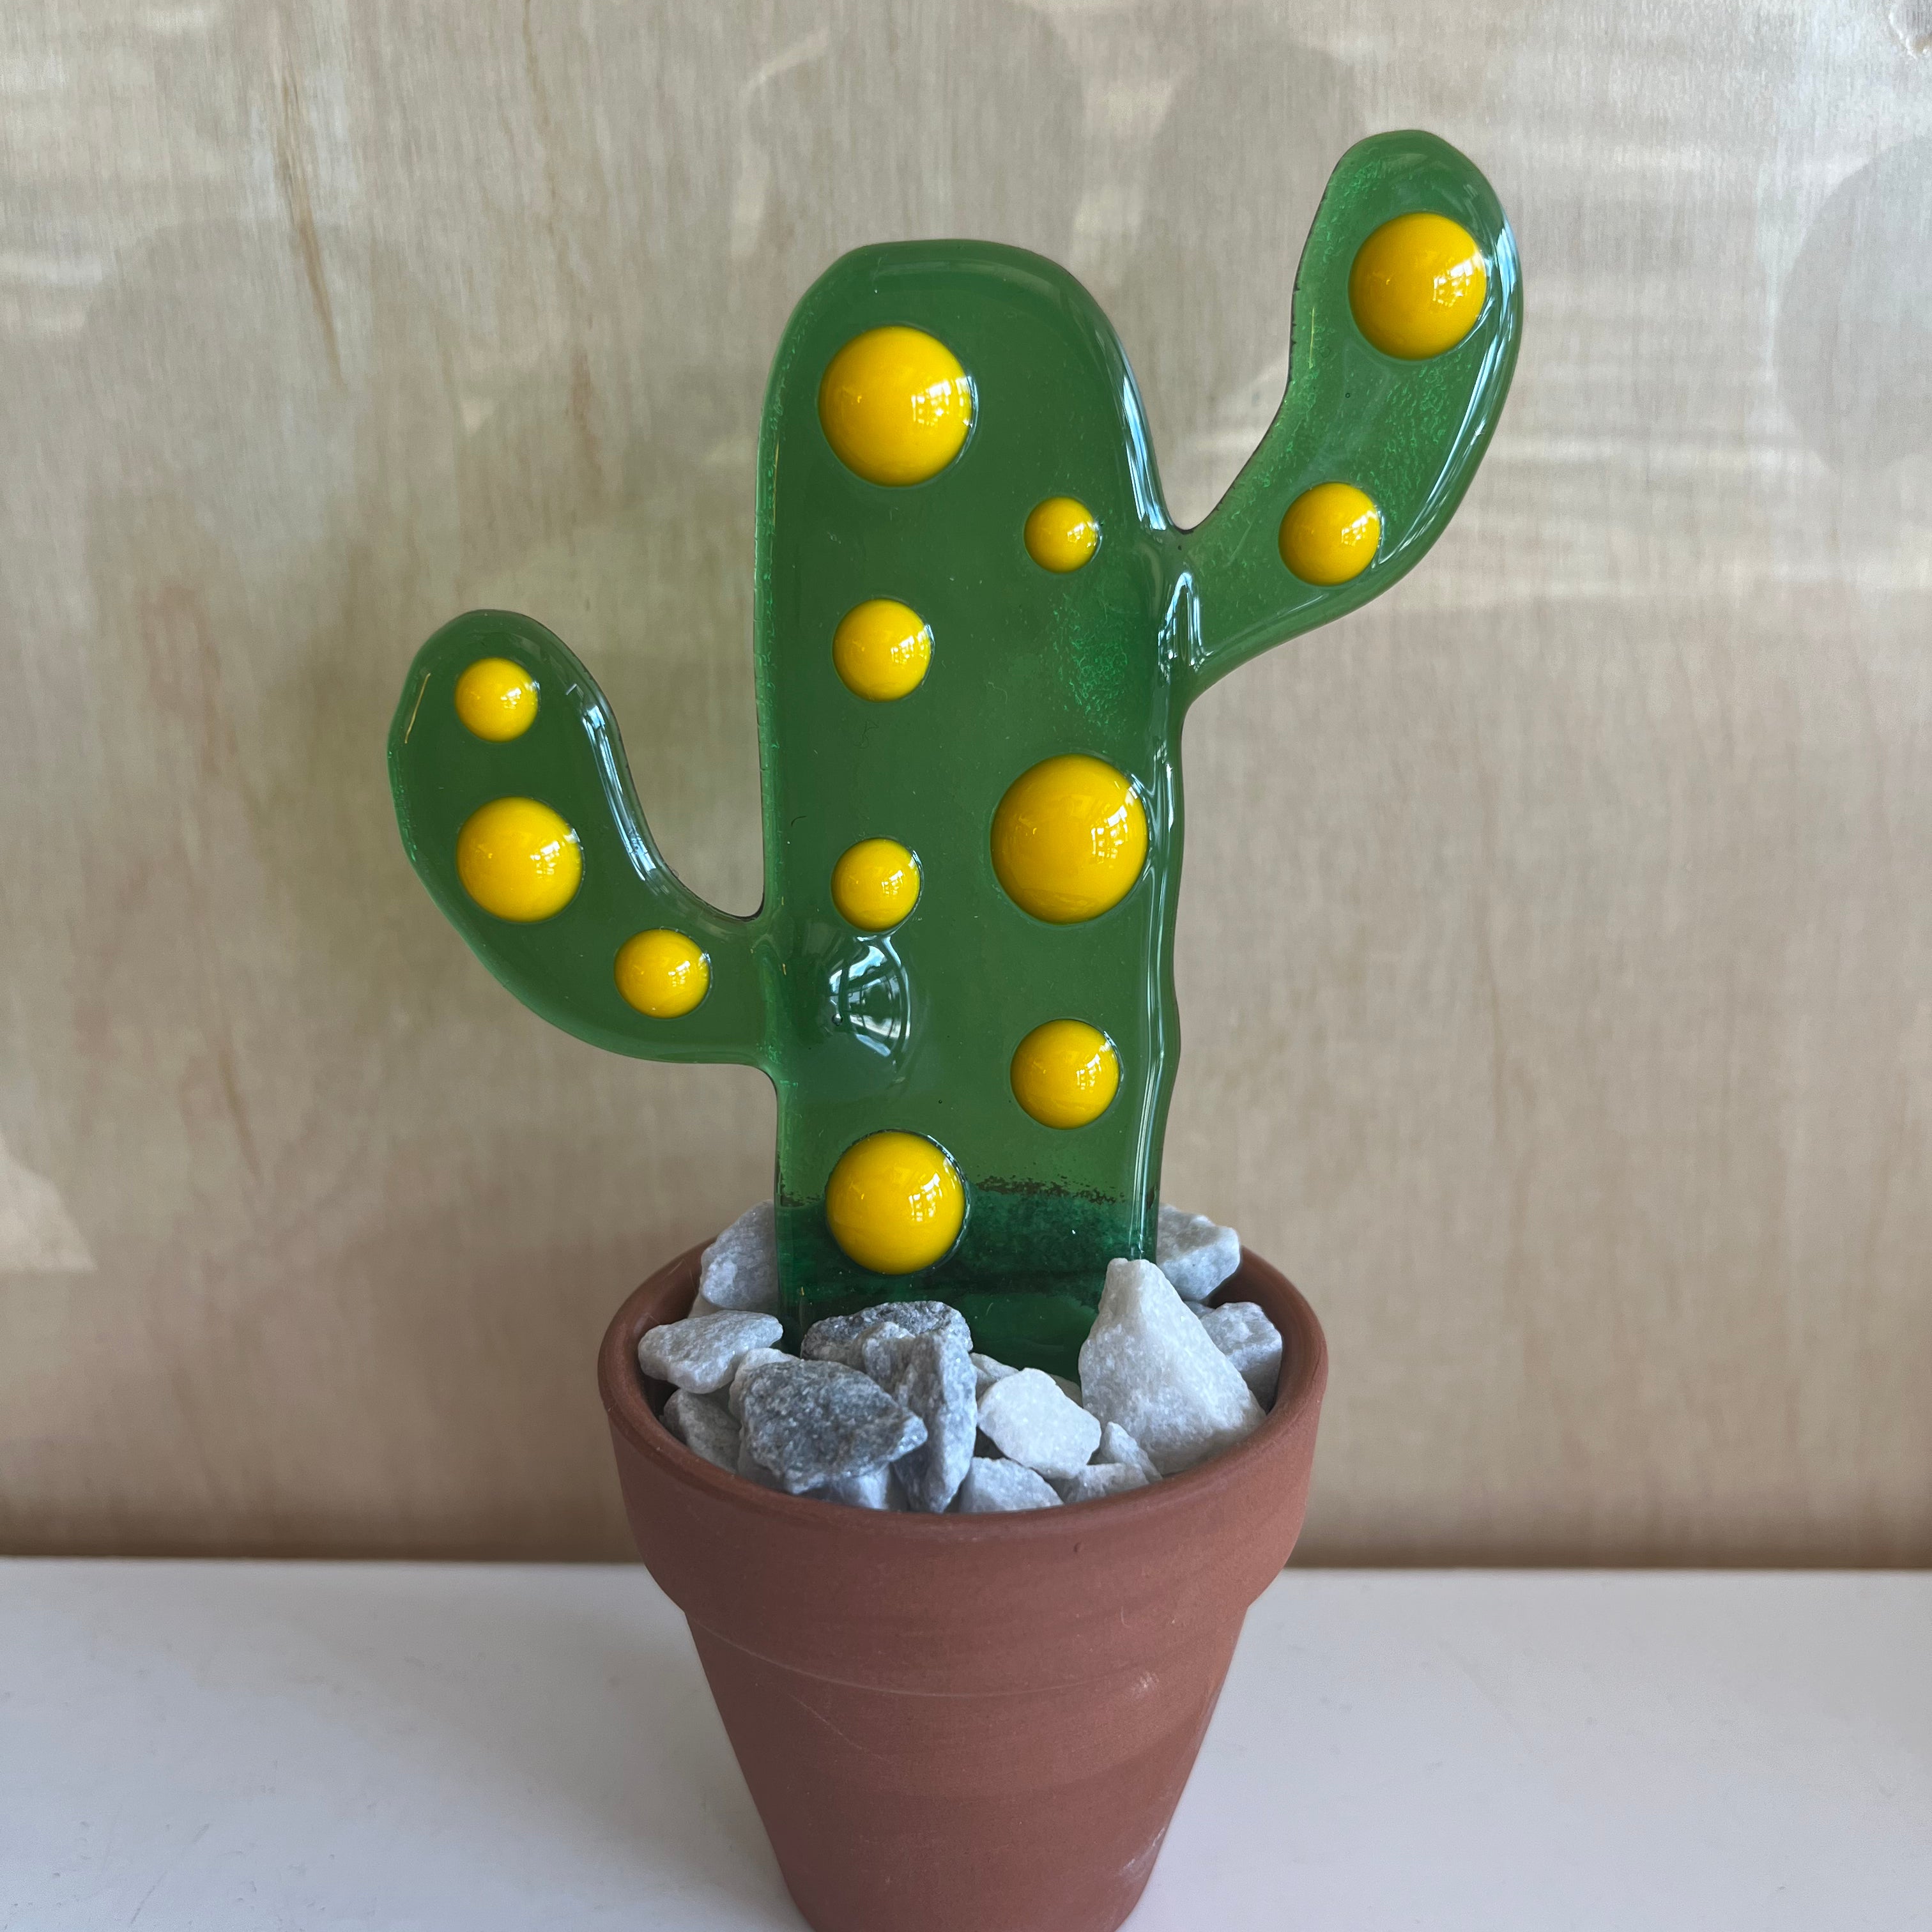 Spotted Cactus